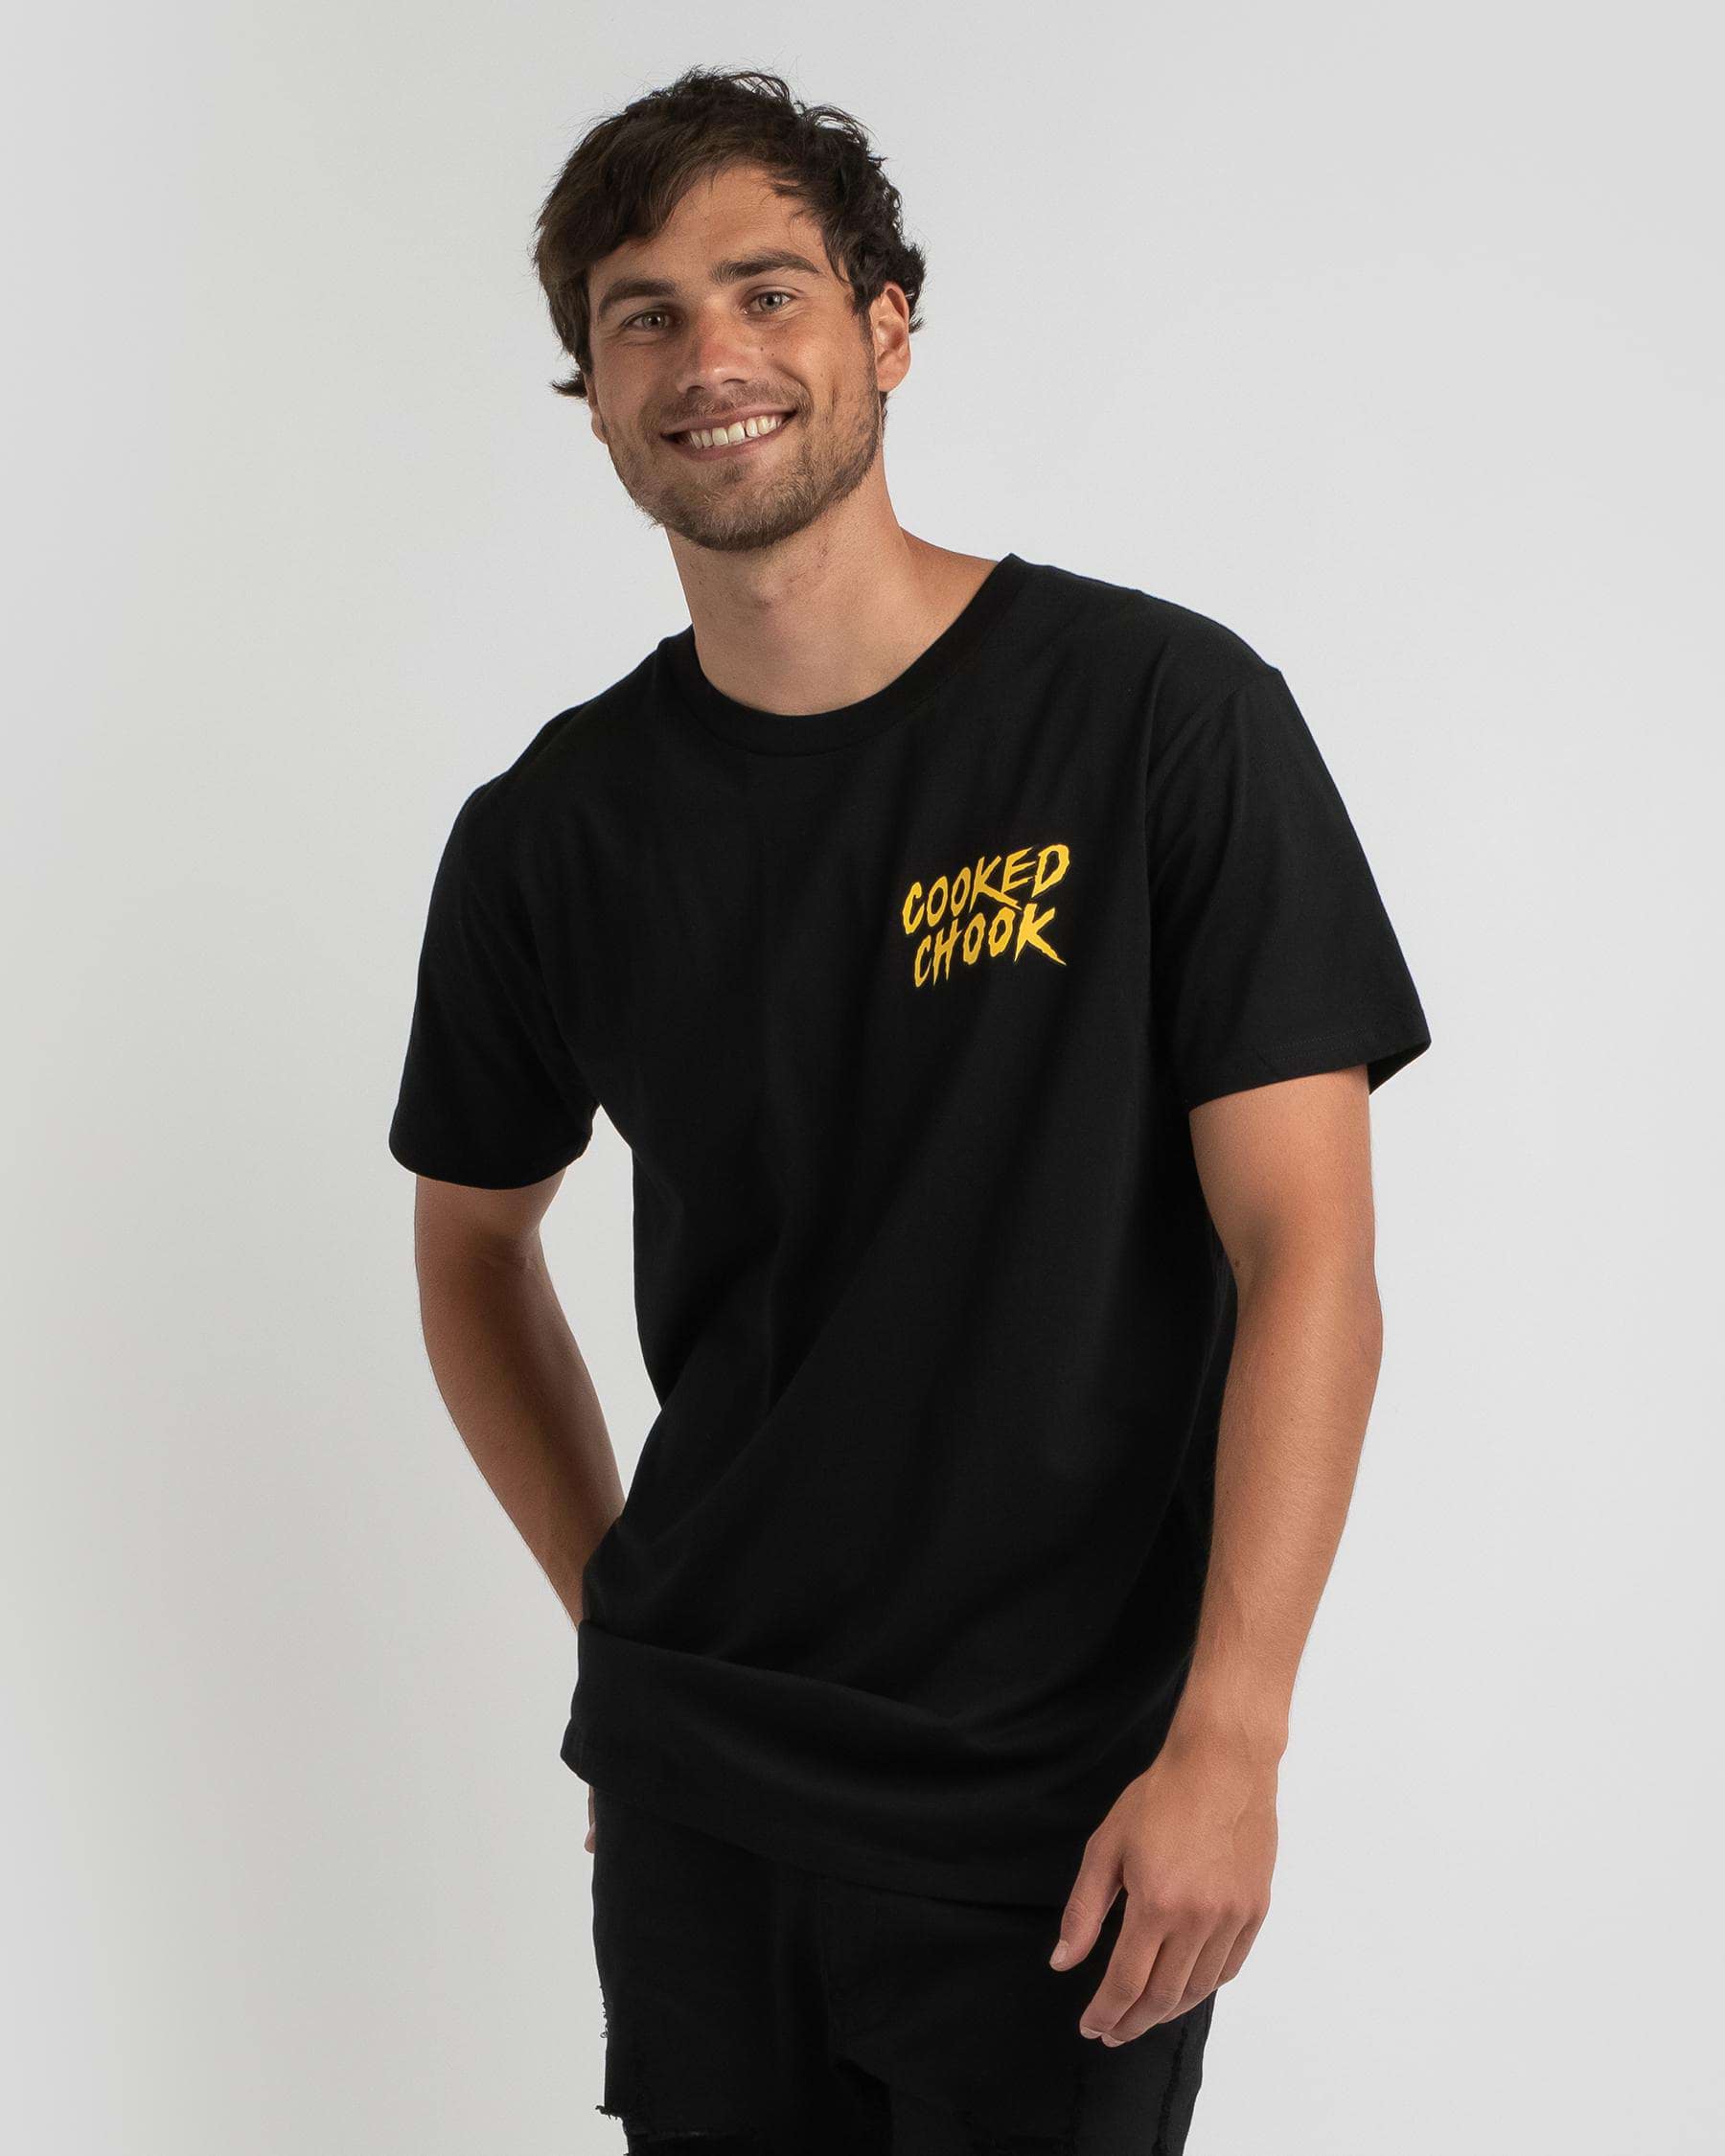 Bush Chook Cooked Chook T-Shirt In Black - Fast Shipping & Easy Returns ...